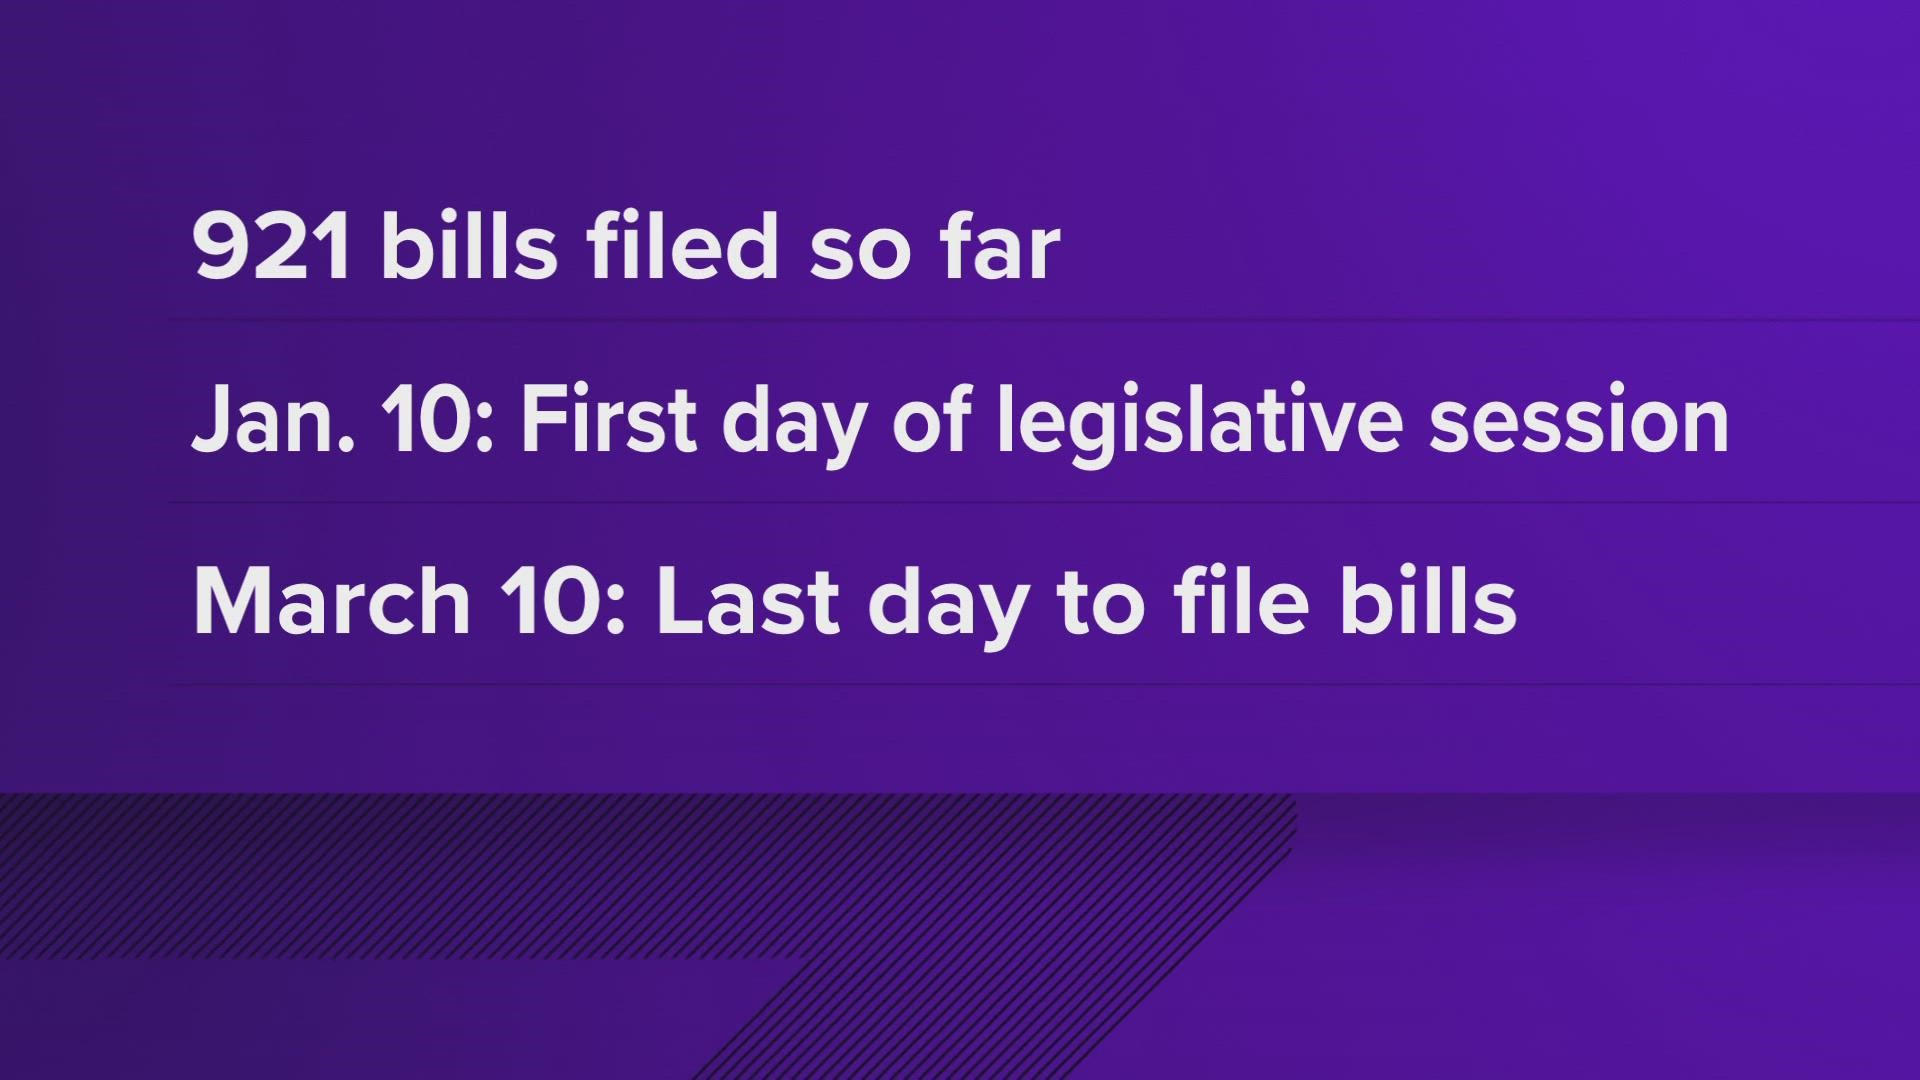 Here's a a brief overlook at some of the bills that have already been filed.